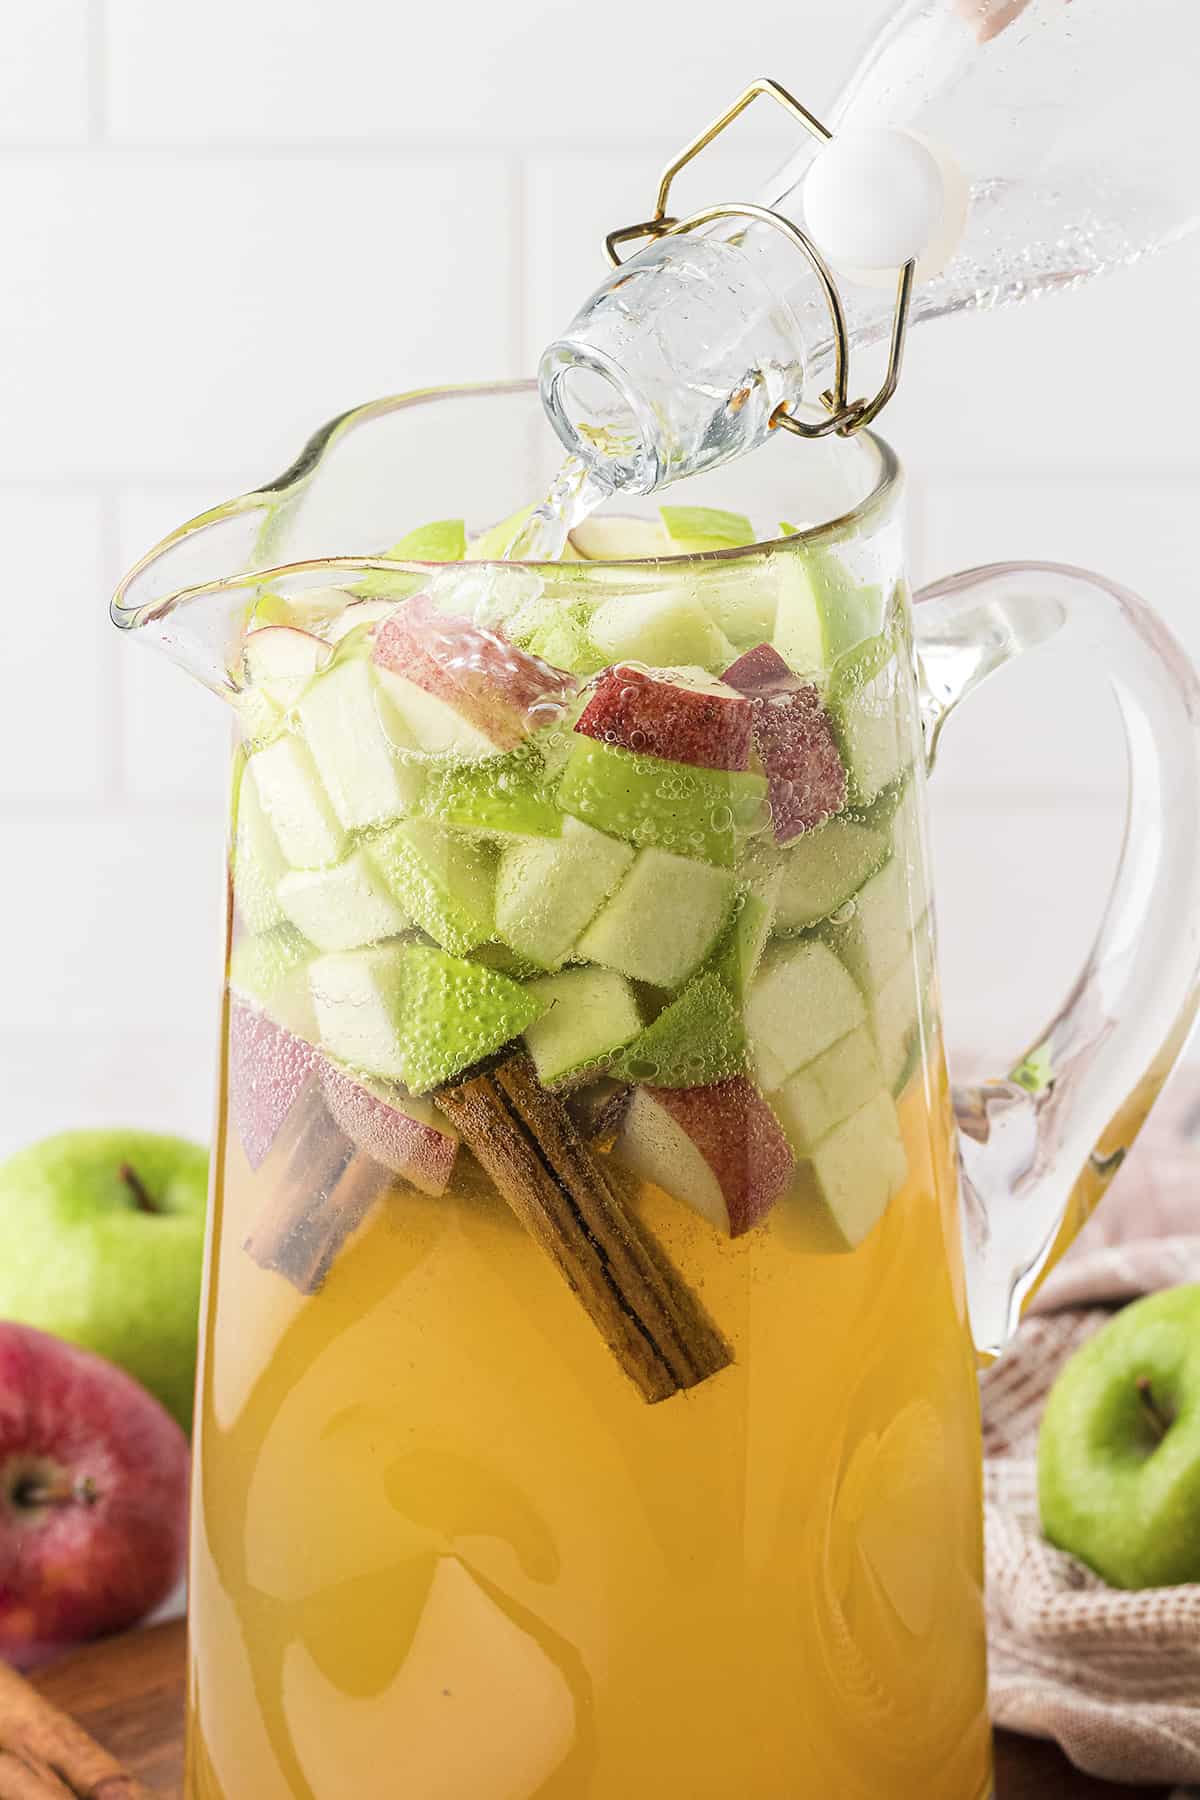 Bottle of club soda being poured into a pitcher of caramel apple sangria.